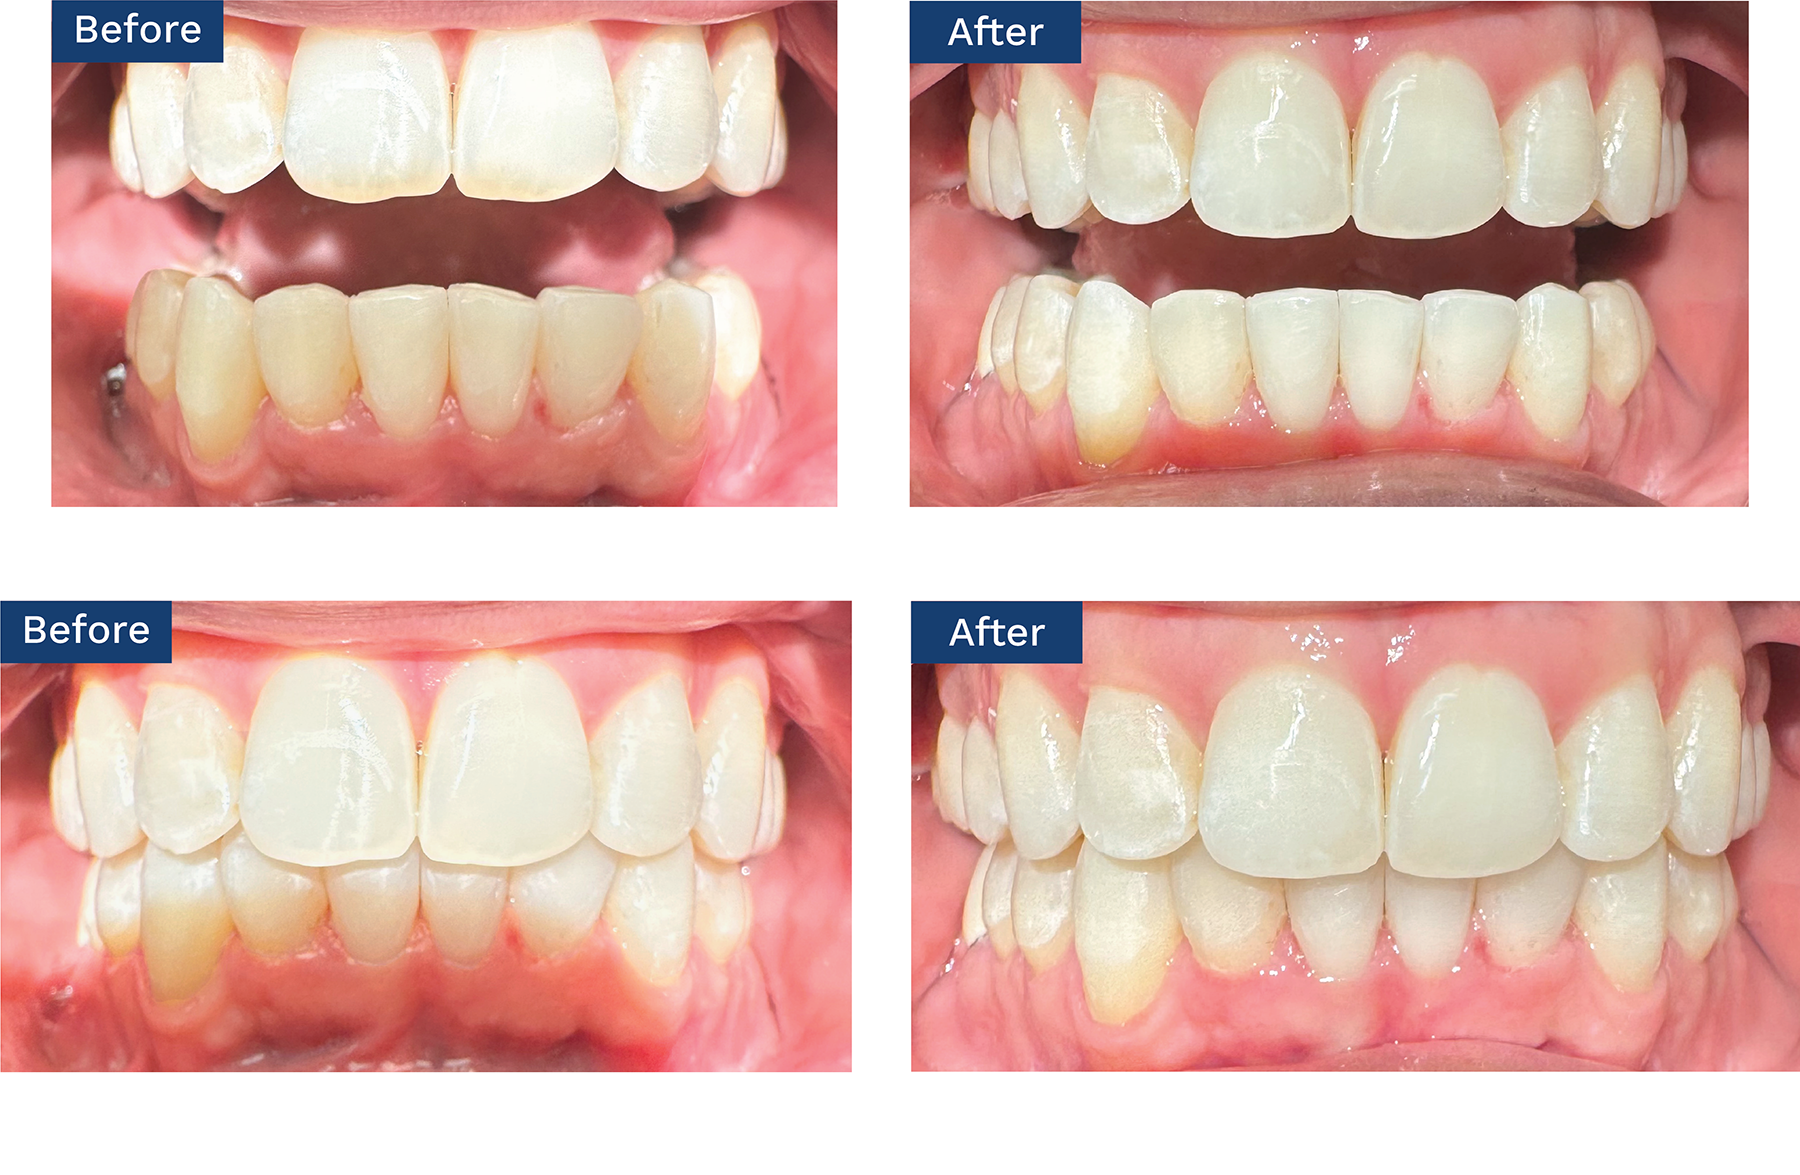 Esthetic Enameloplasty With Clear Aligner Treatment | Image Credit: © Robert M. Stern, DMD